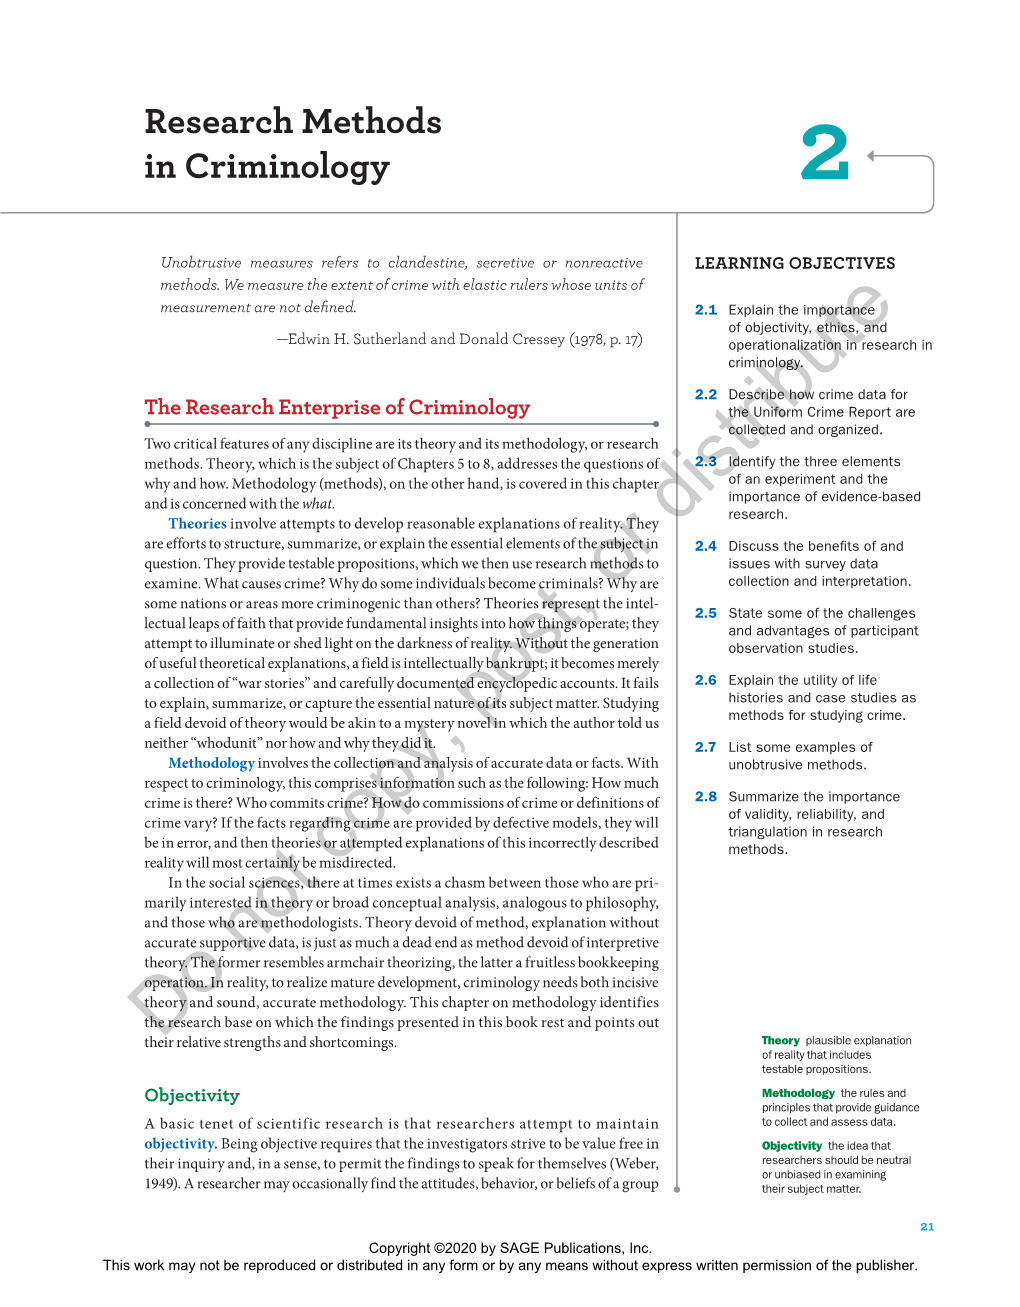 Chapter 2: Research Methods in Criminology 23